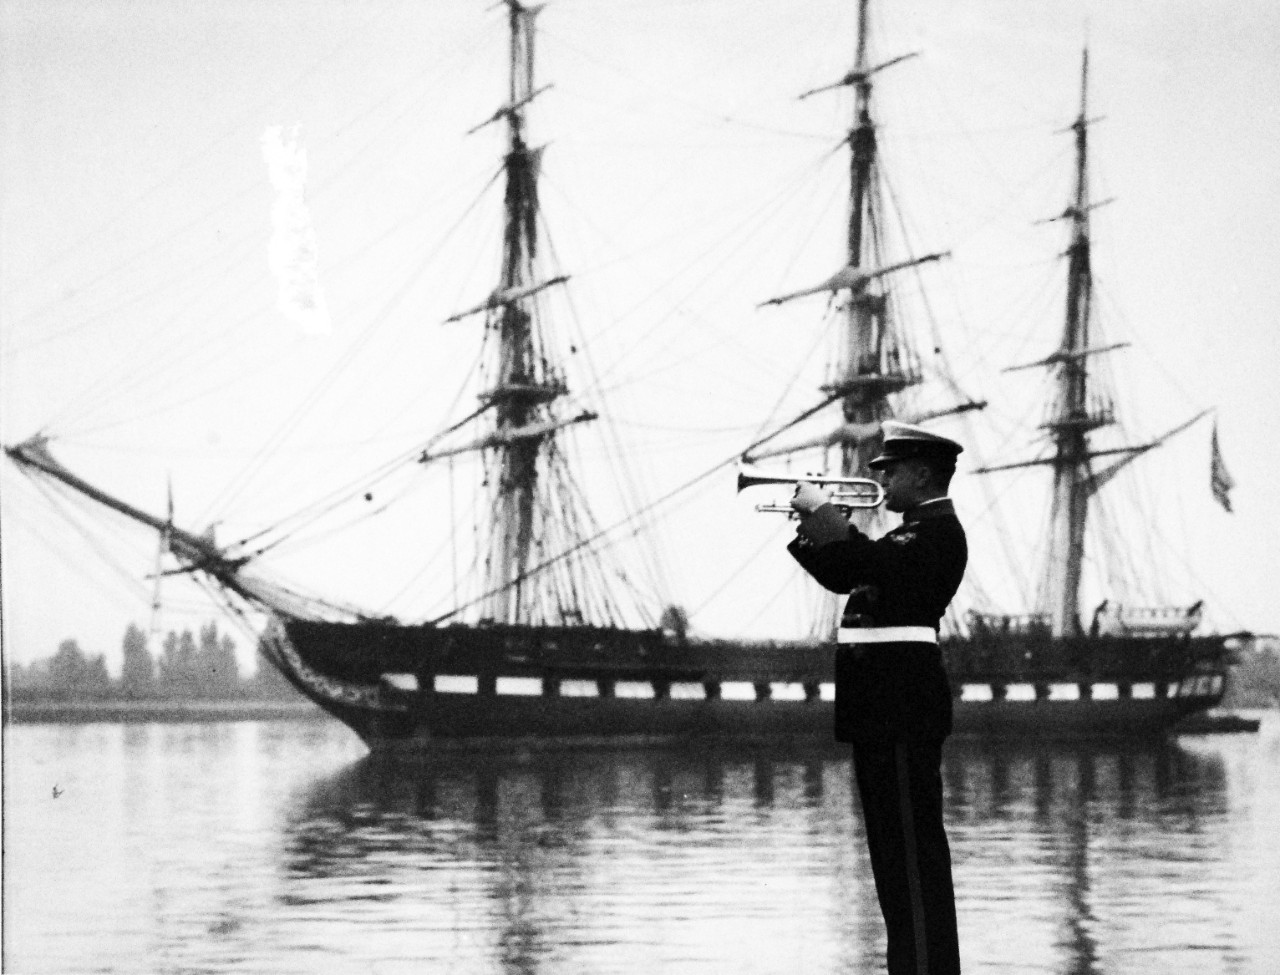 80-G-416313:  USS Constitution, 1931.    Navy Bandsman blowing colors for USS Constitution(IX-21) at Washington, D.C.  Photograph released November 11, 1931.   Official U.S. Navy Photograph, now in the collections of the National Archives.  (2016/10/18).  